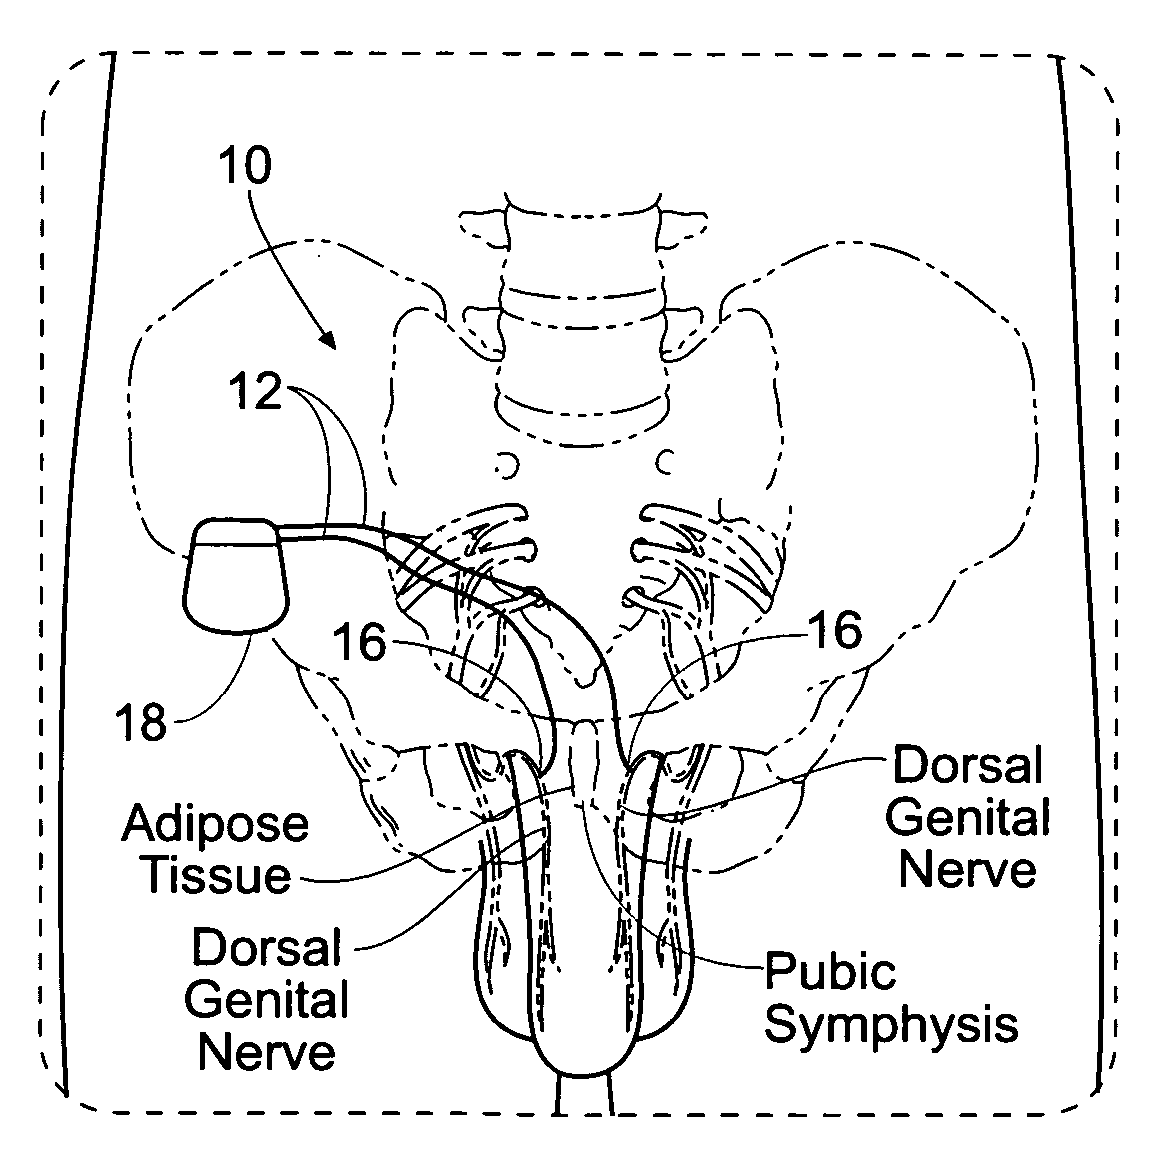 Systems for electrical stimulation of nerves in adipose tissue regions